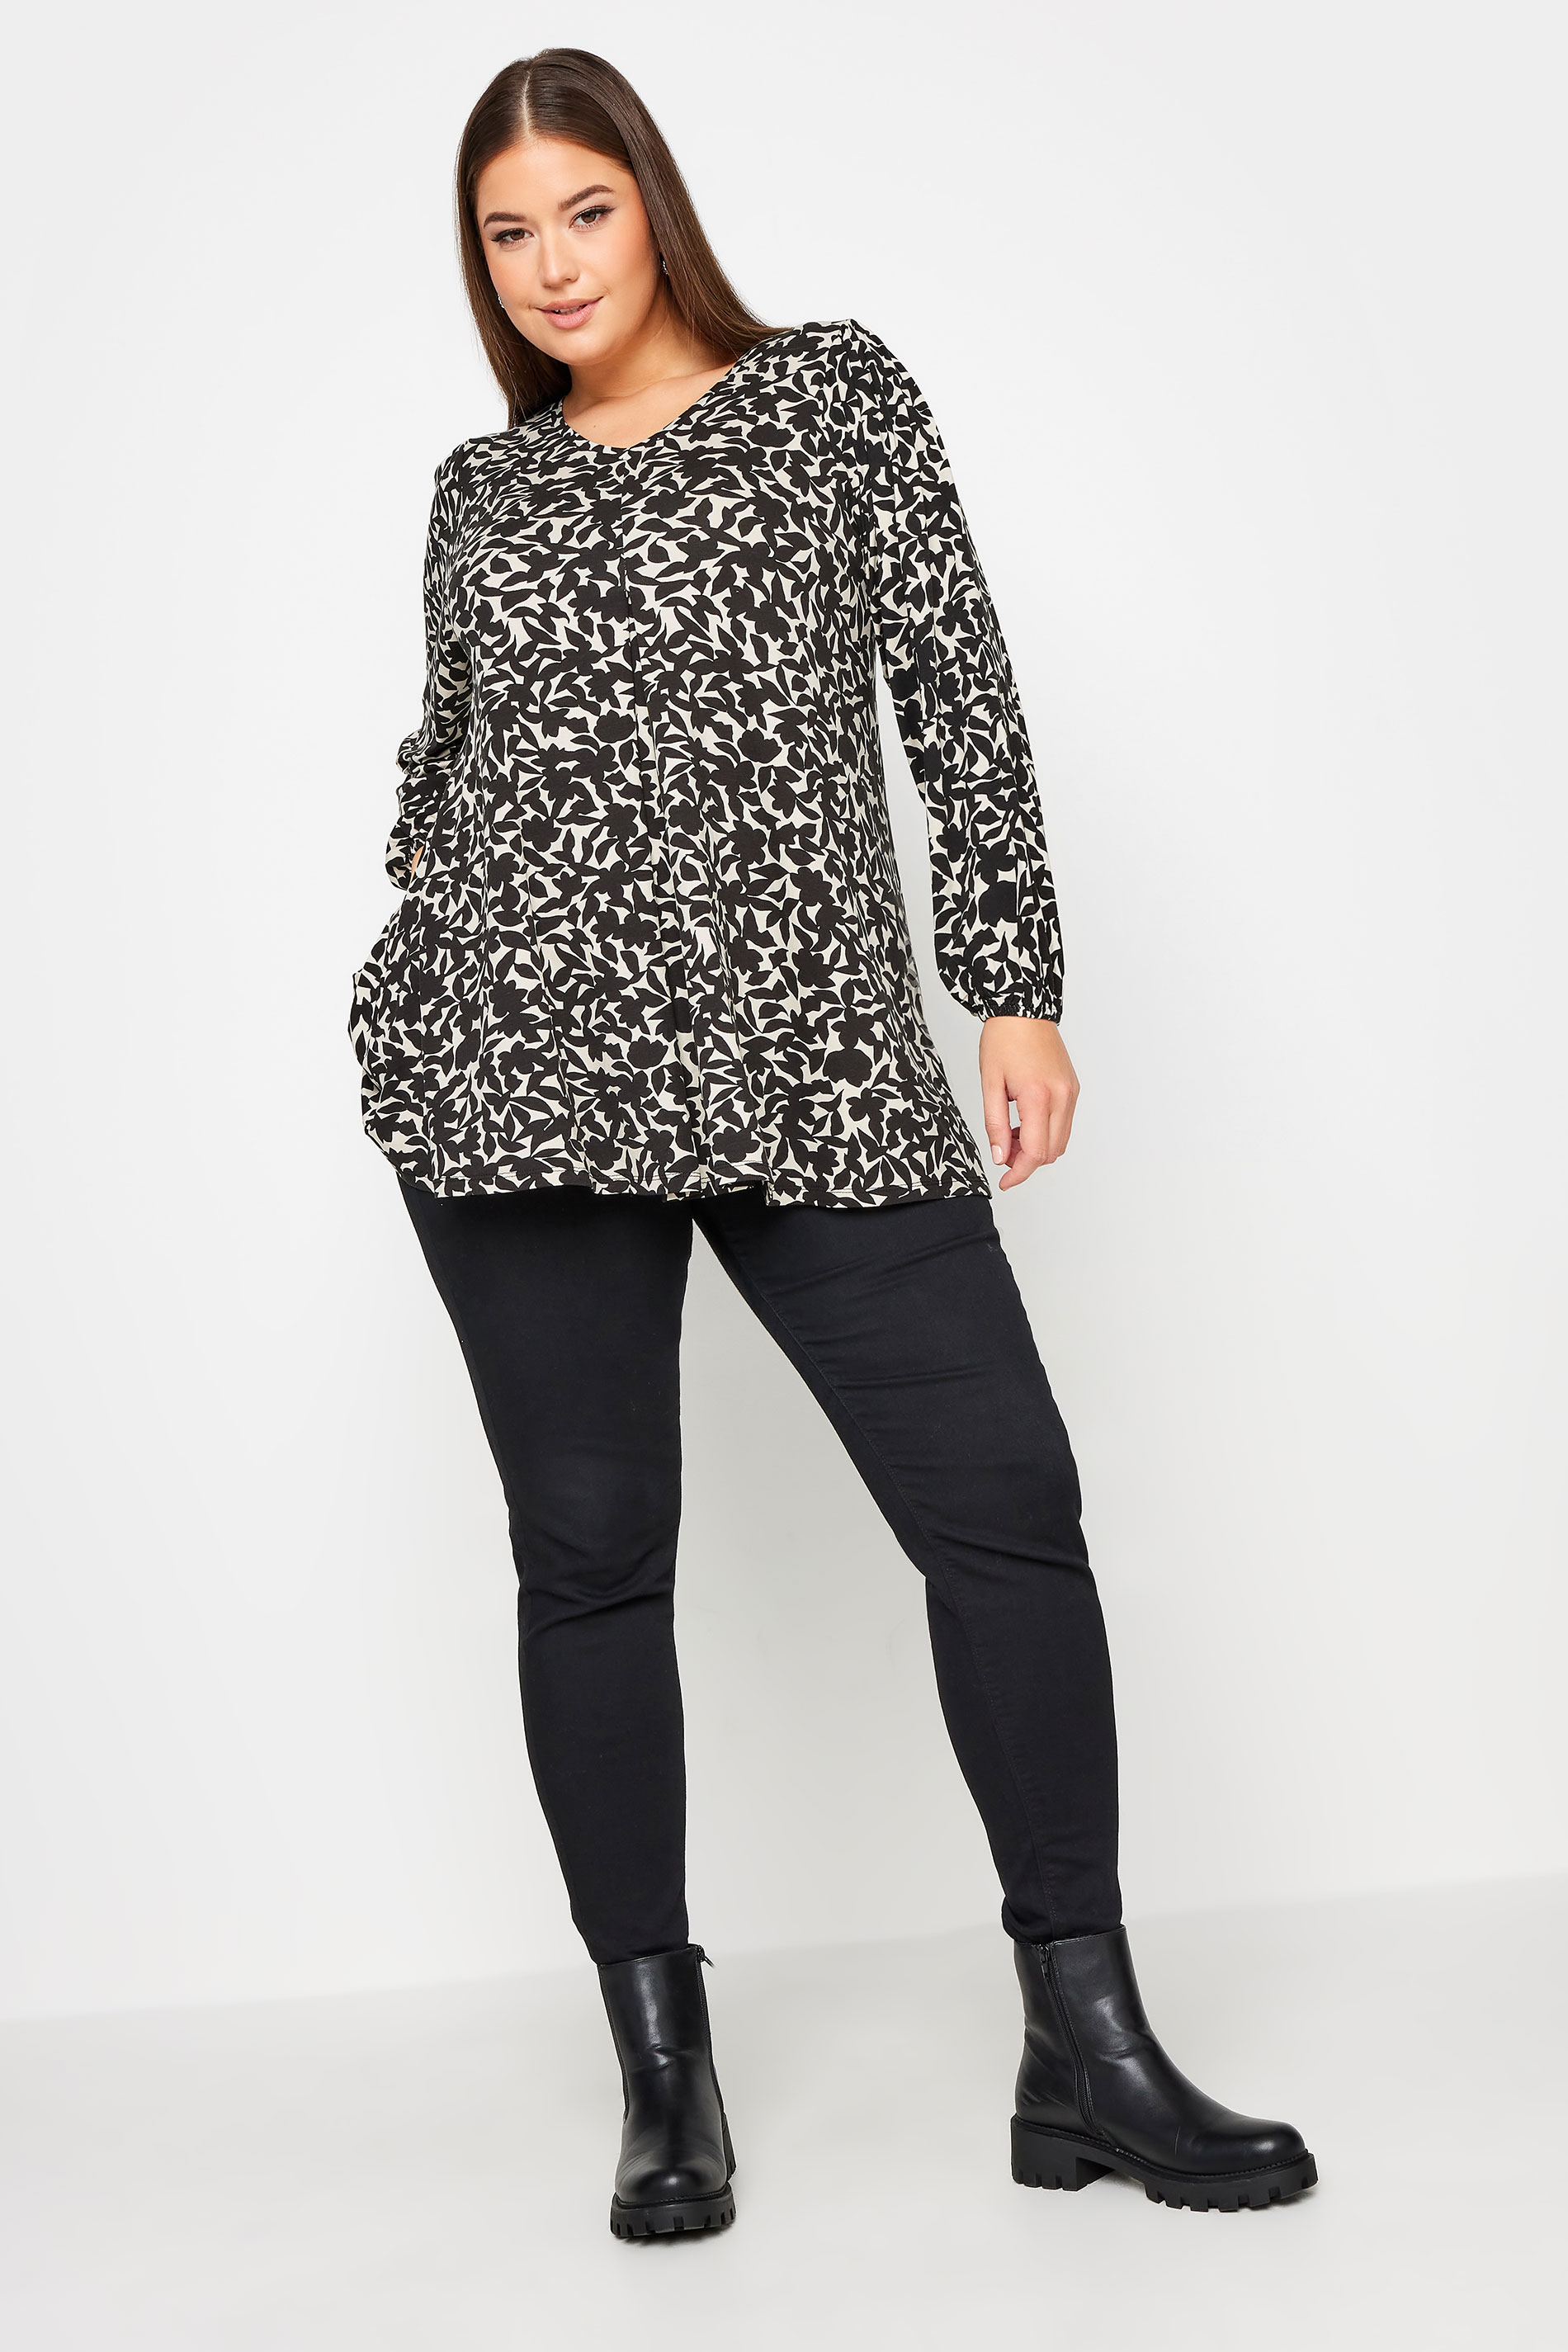 YOURS Plus Size Black & White Floral Print Long Sleeve Swing Top | Yours Clothing 2